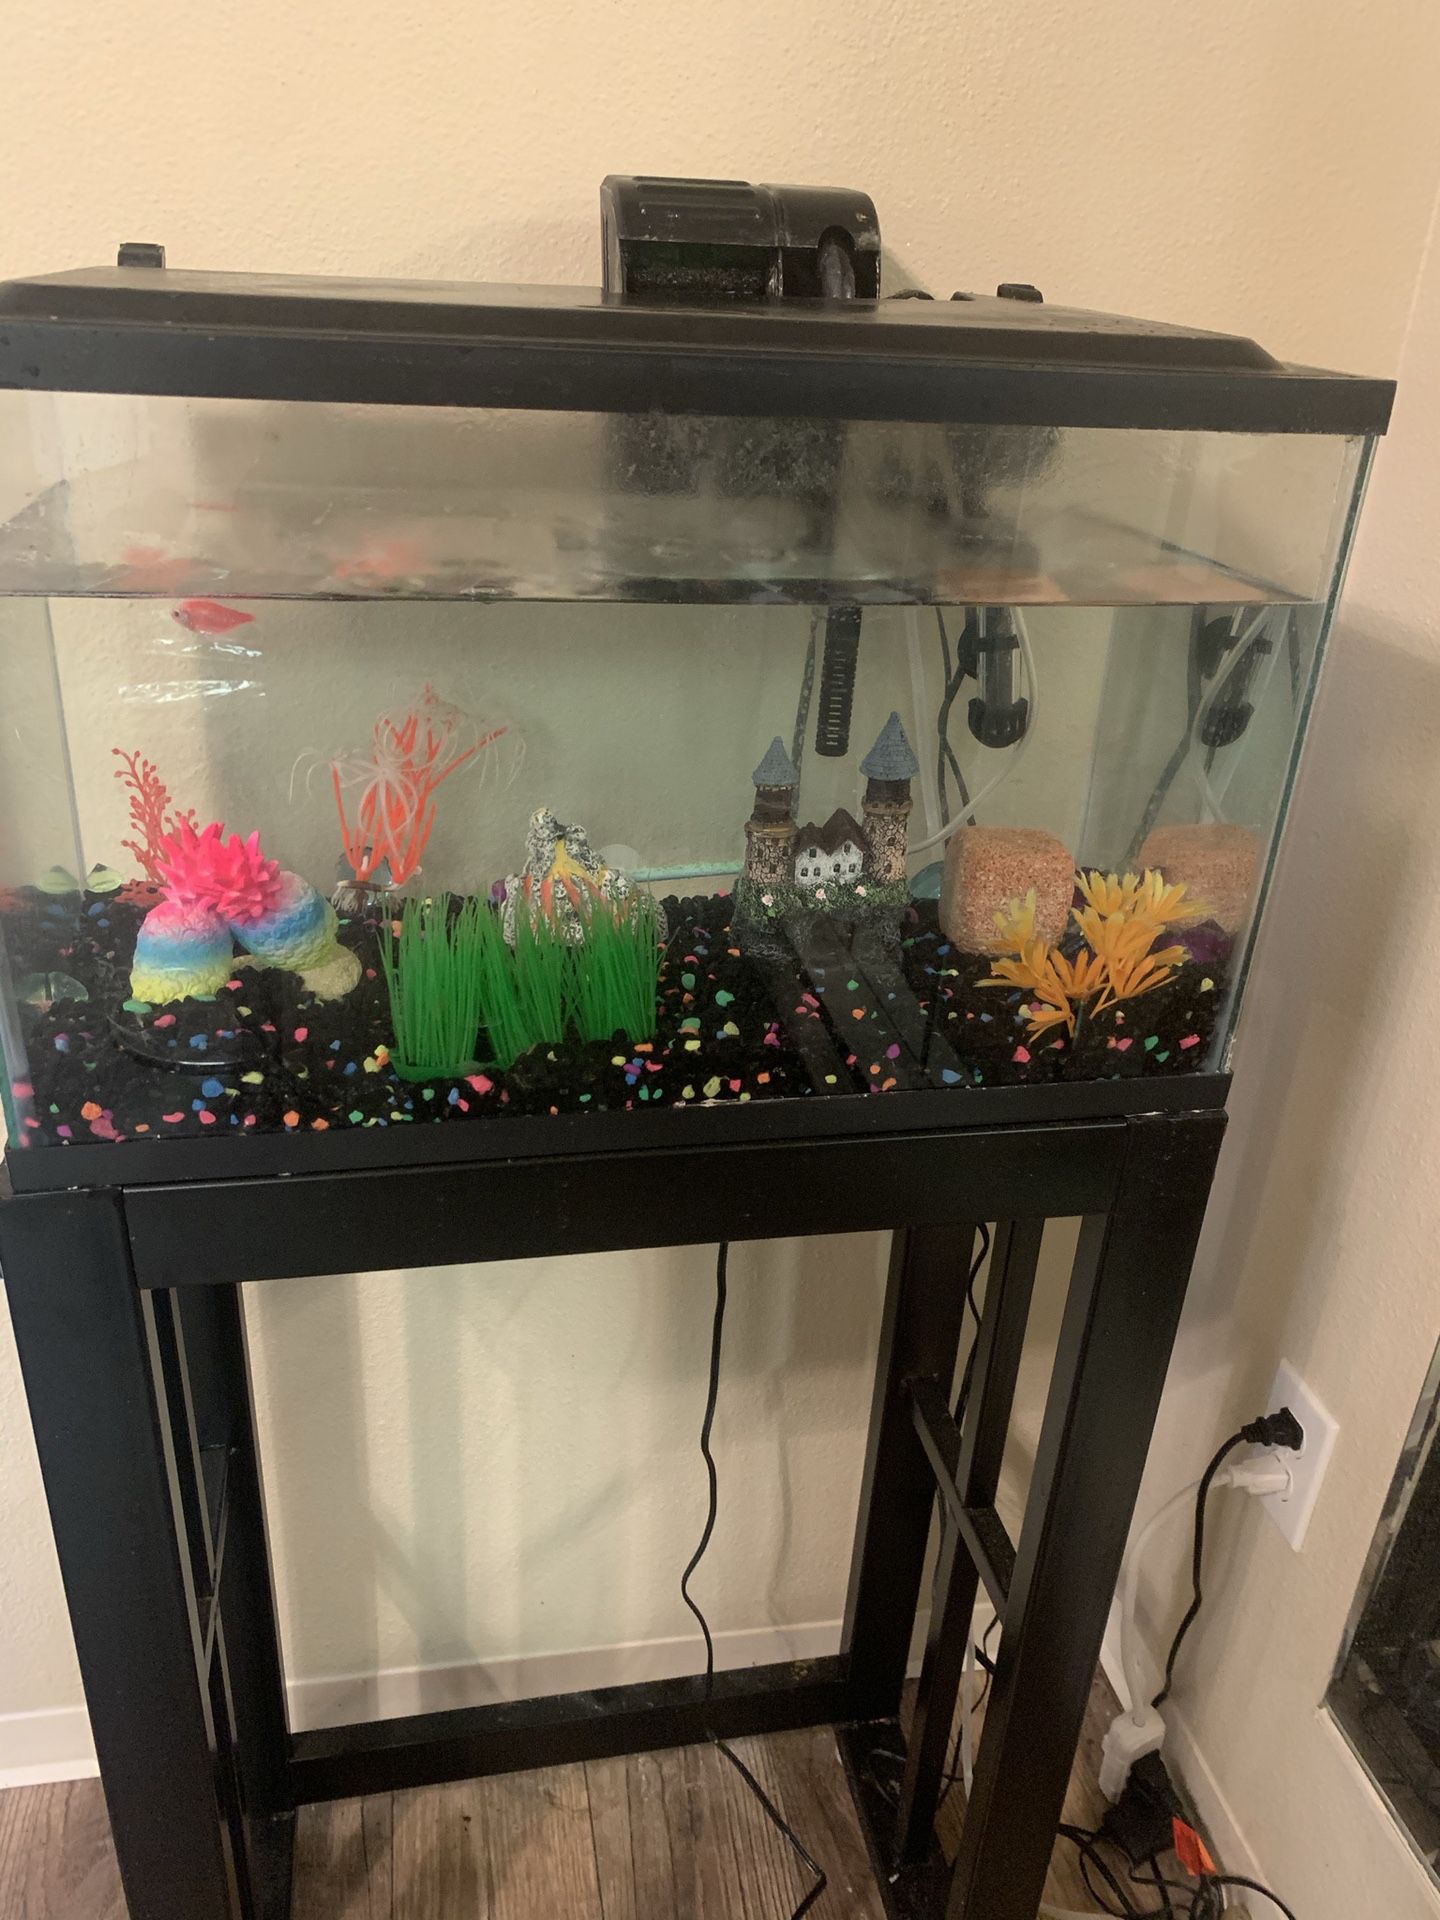 10 gallon Fish tank with stand filter decor One GloFish Included heater also has a bubble wand